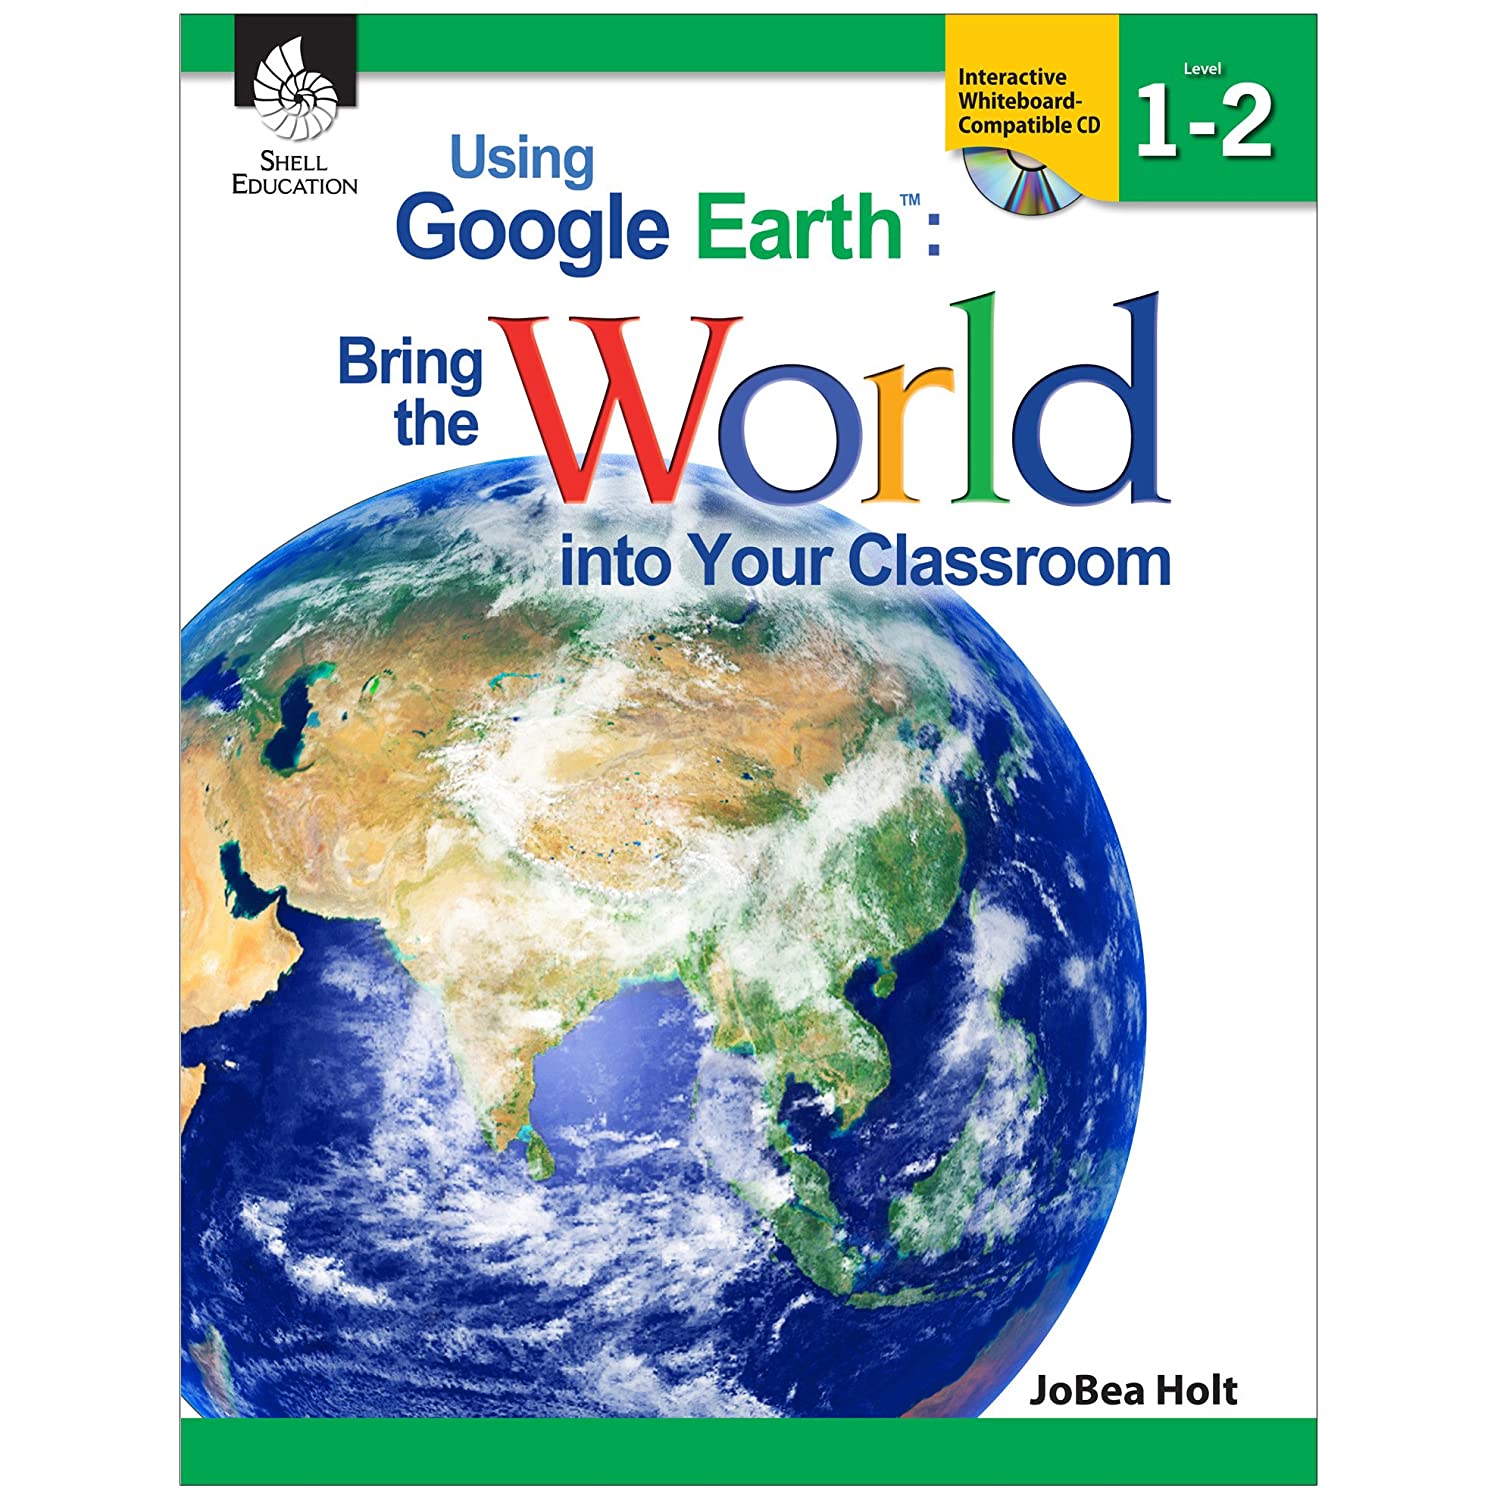 USING GOOGLE EARTH : BRING THE WORLD INTO YOUR CLASSROOM LEVELS 1-2